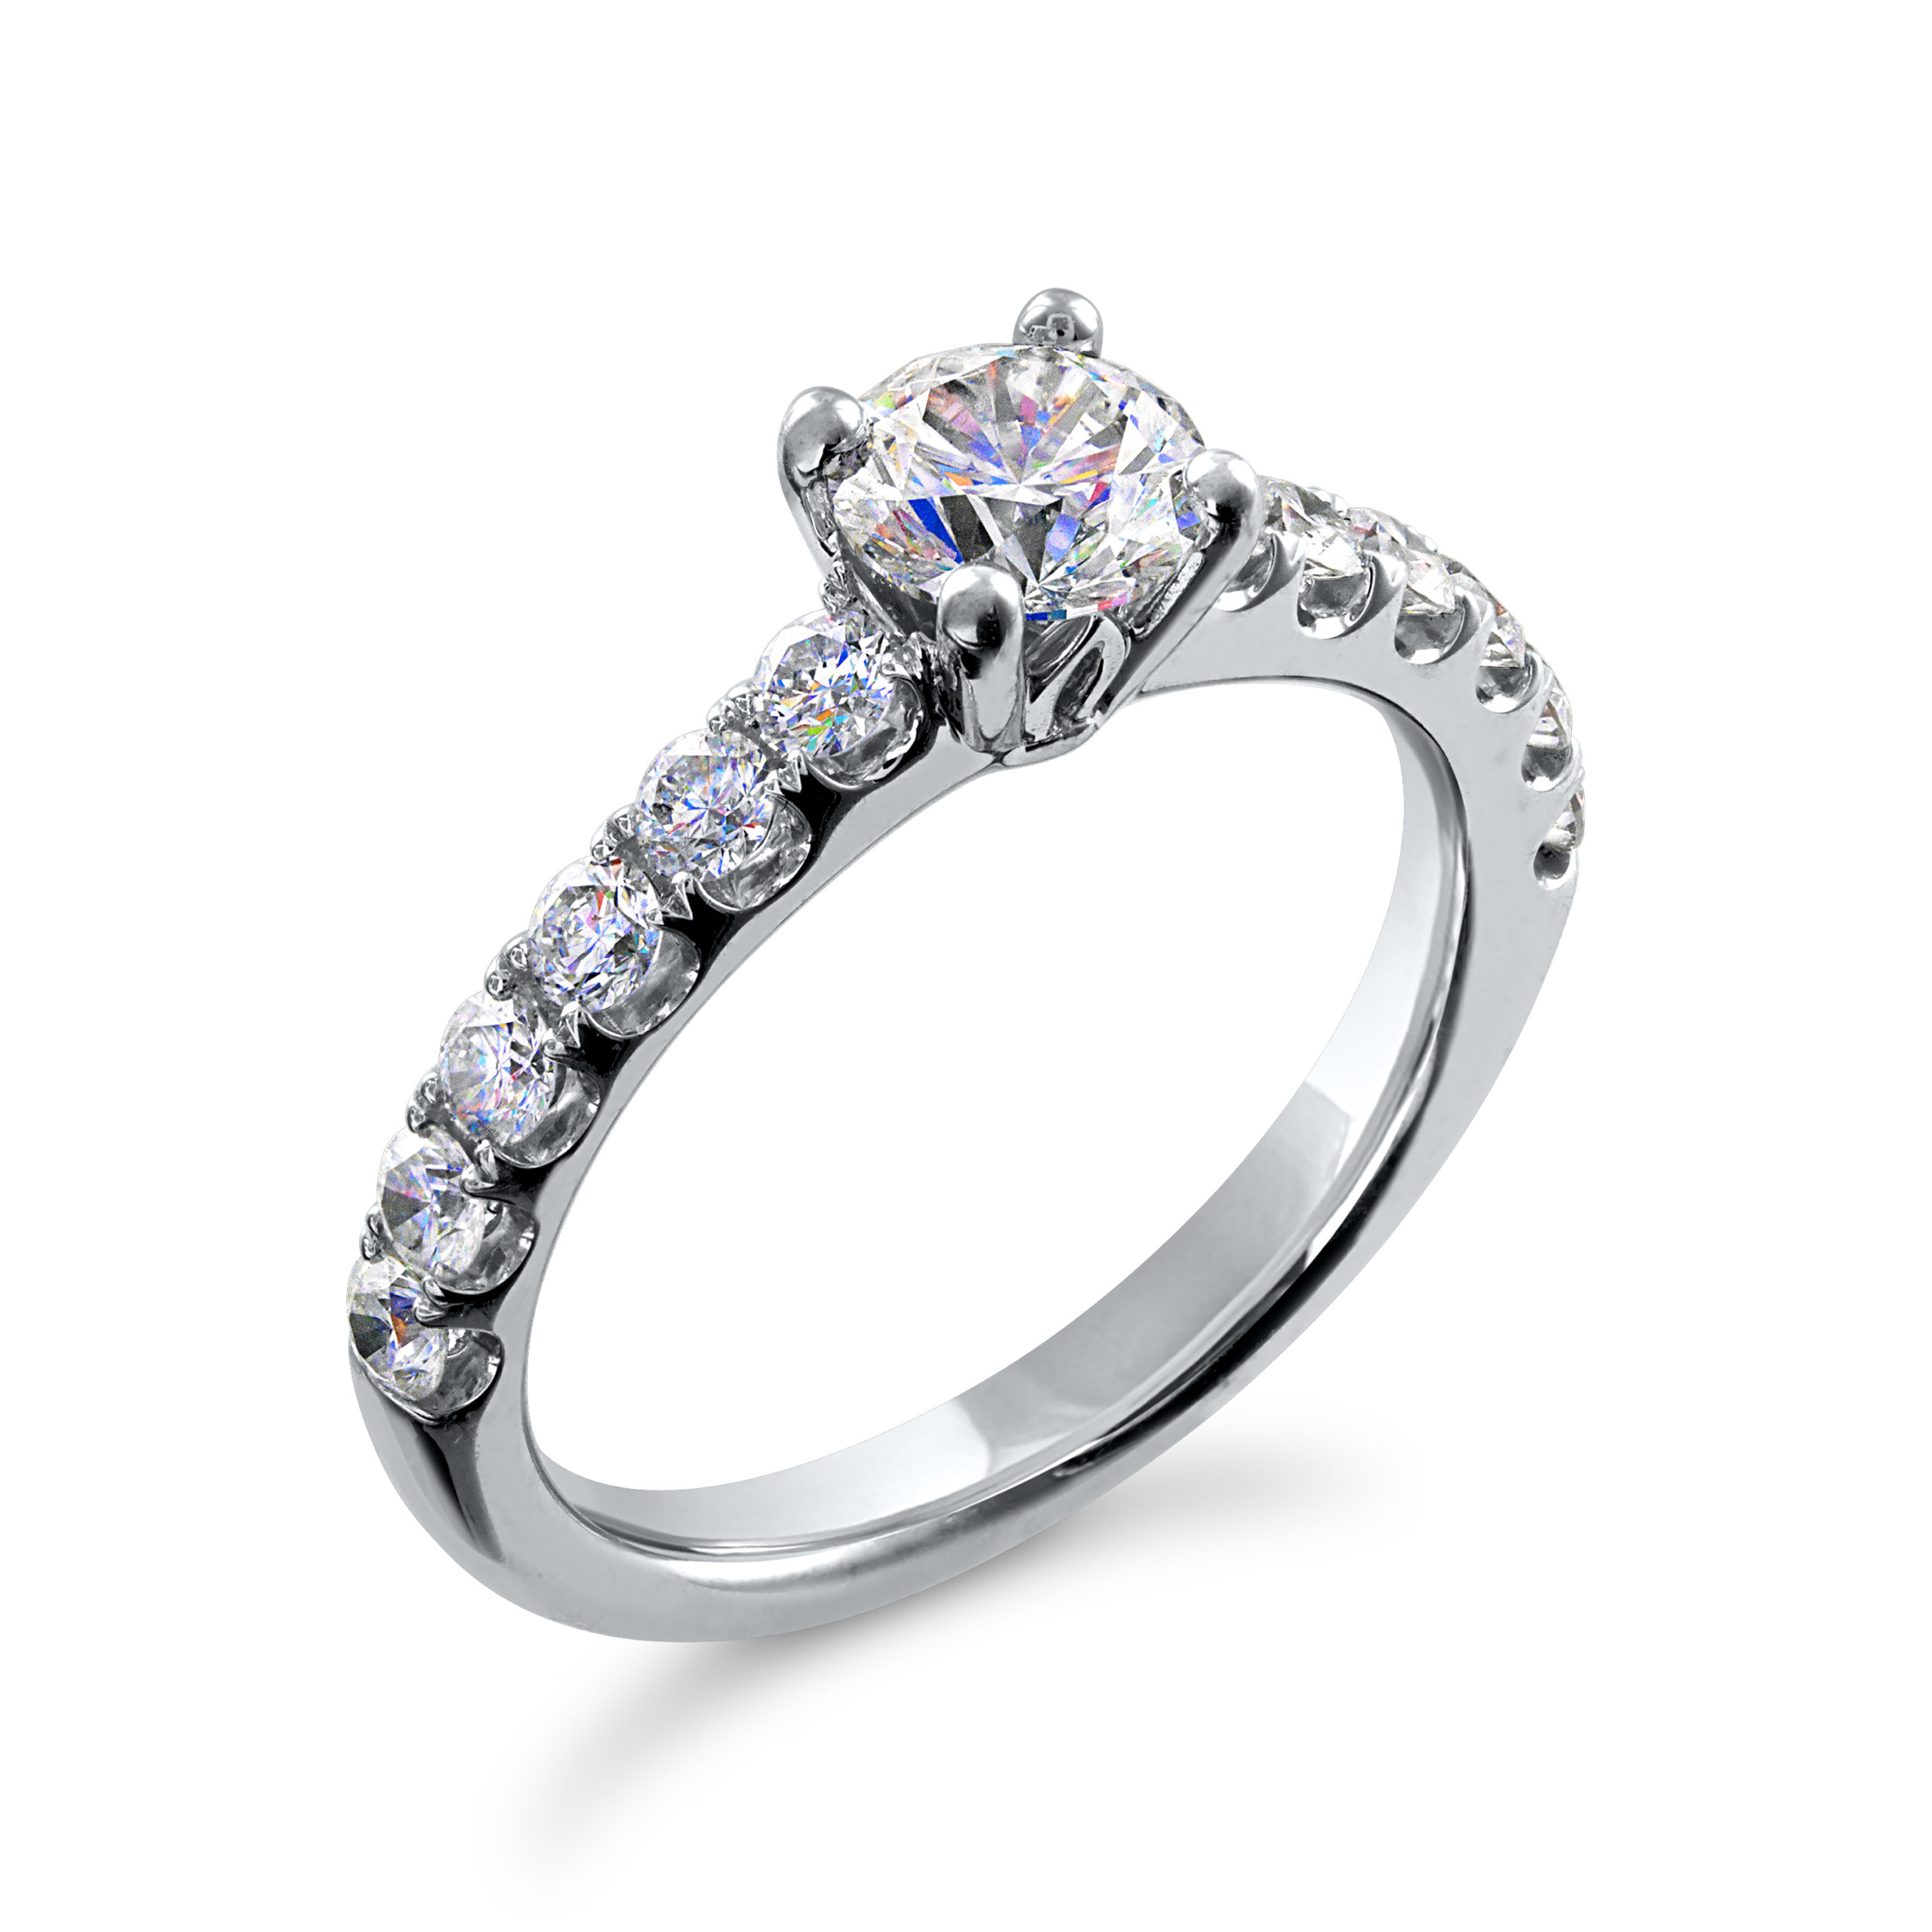 Facets of Fire Diamond Engagement Ring